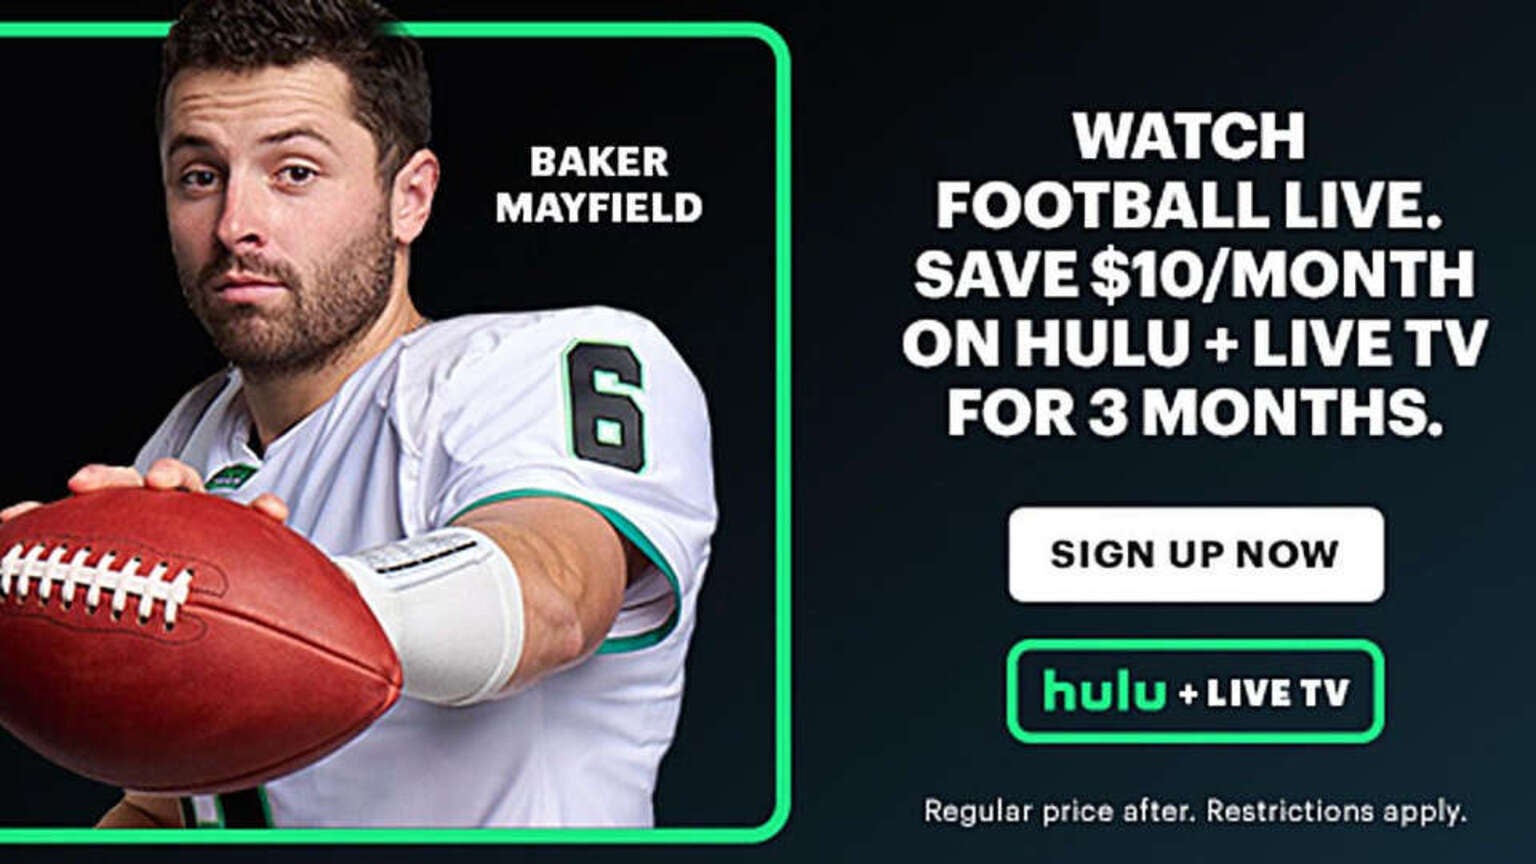 ENDS TODAY Get $10 OFF Your First 3 Months of Hulu + Live TV, After 7-Day Free Trial